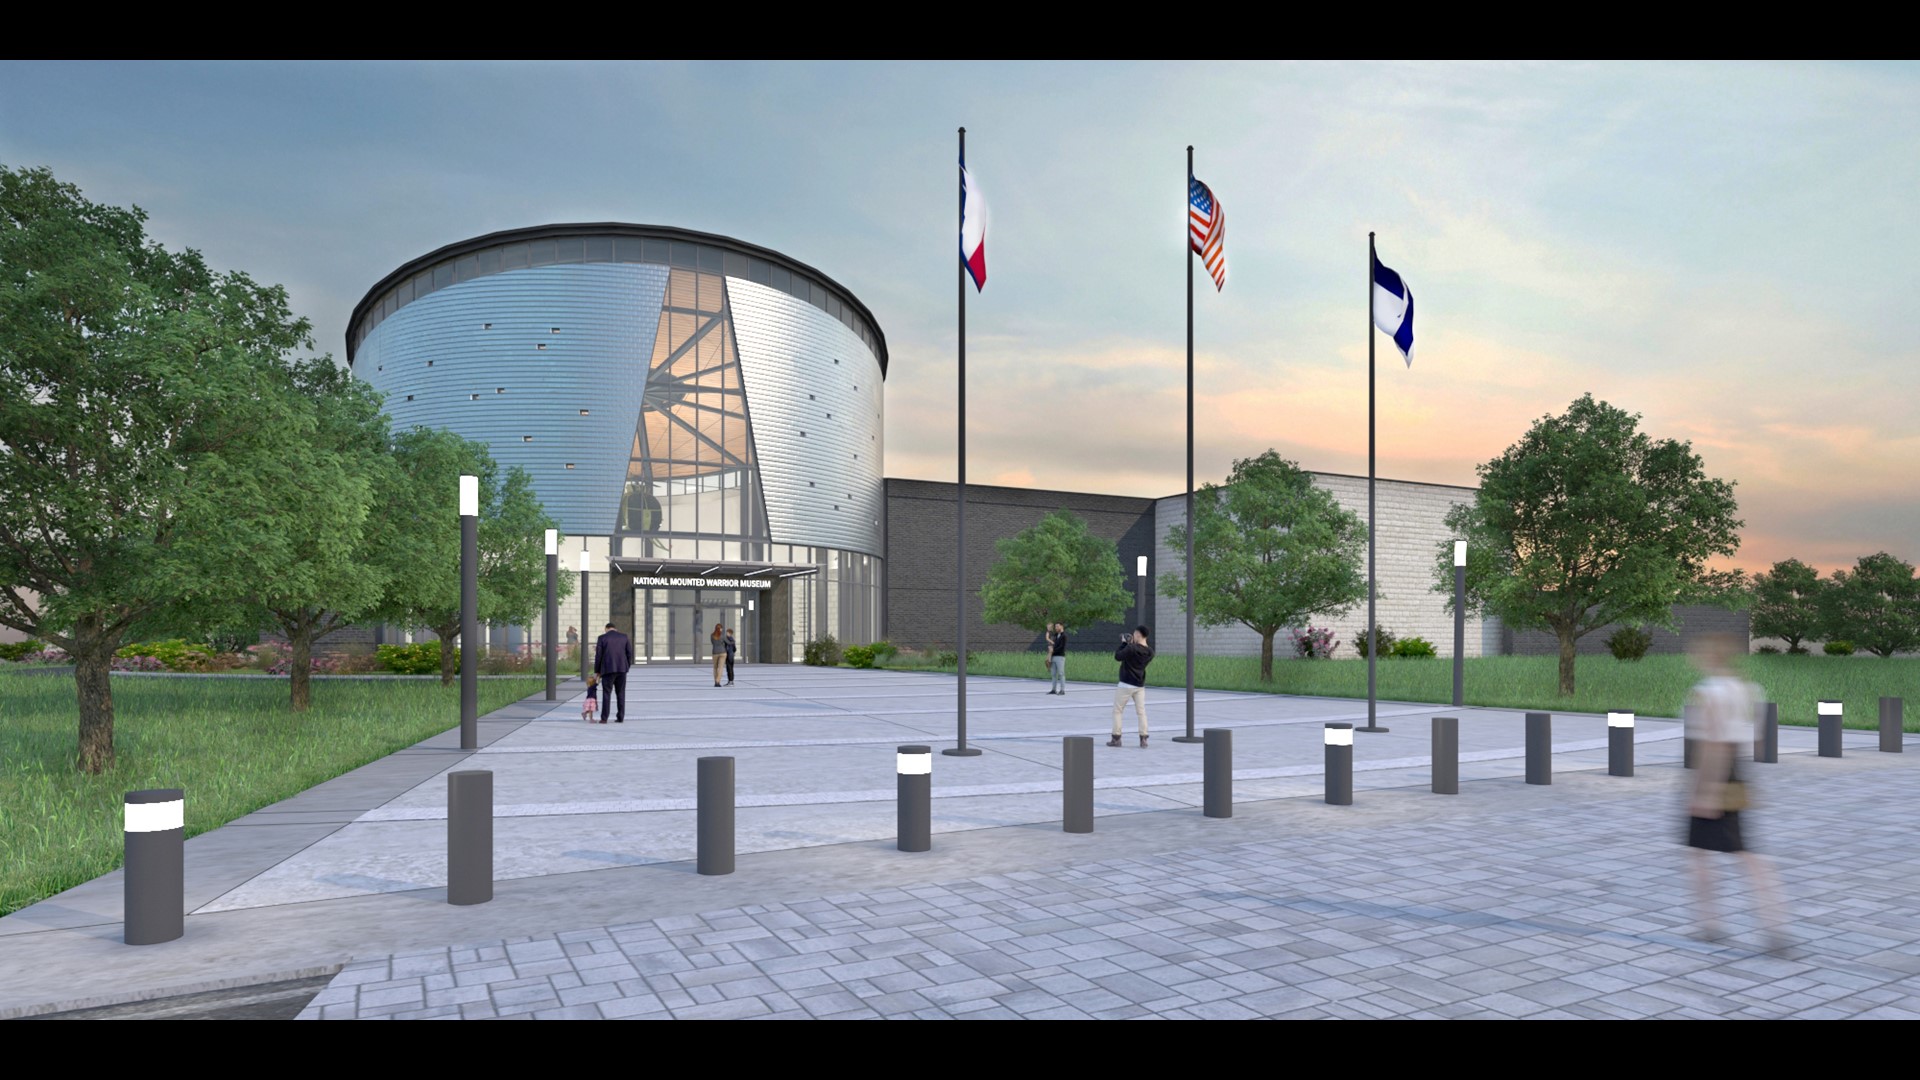 The museum has been years in the planning, and with construction now beginning, it is set to open in 2022.